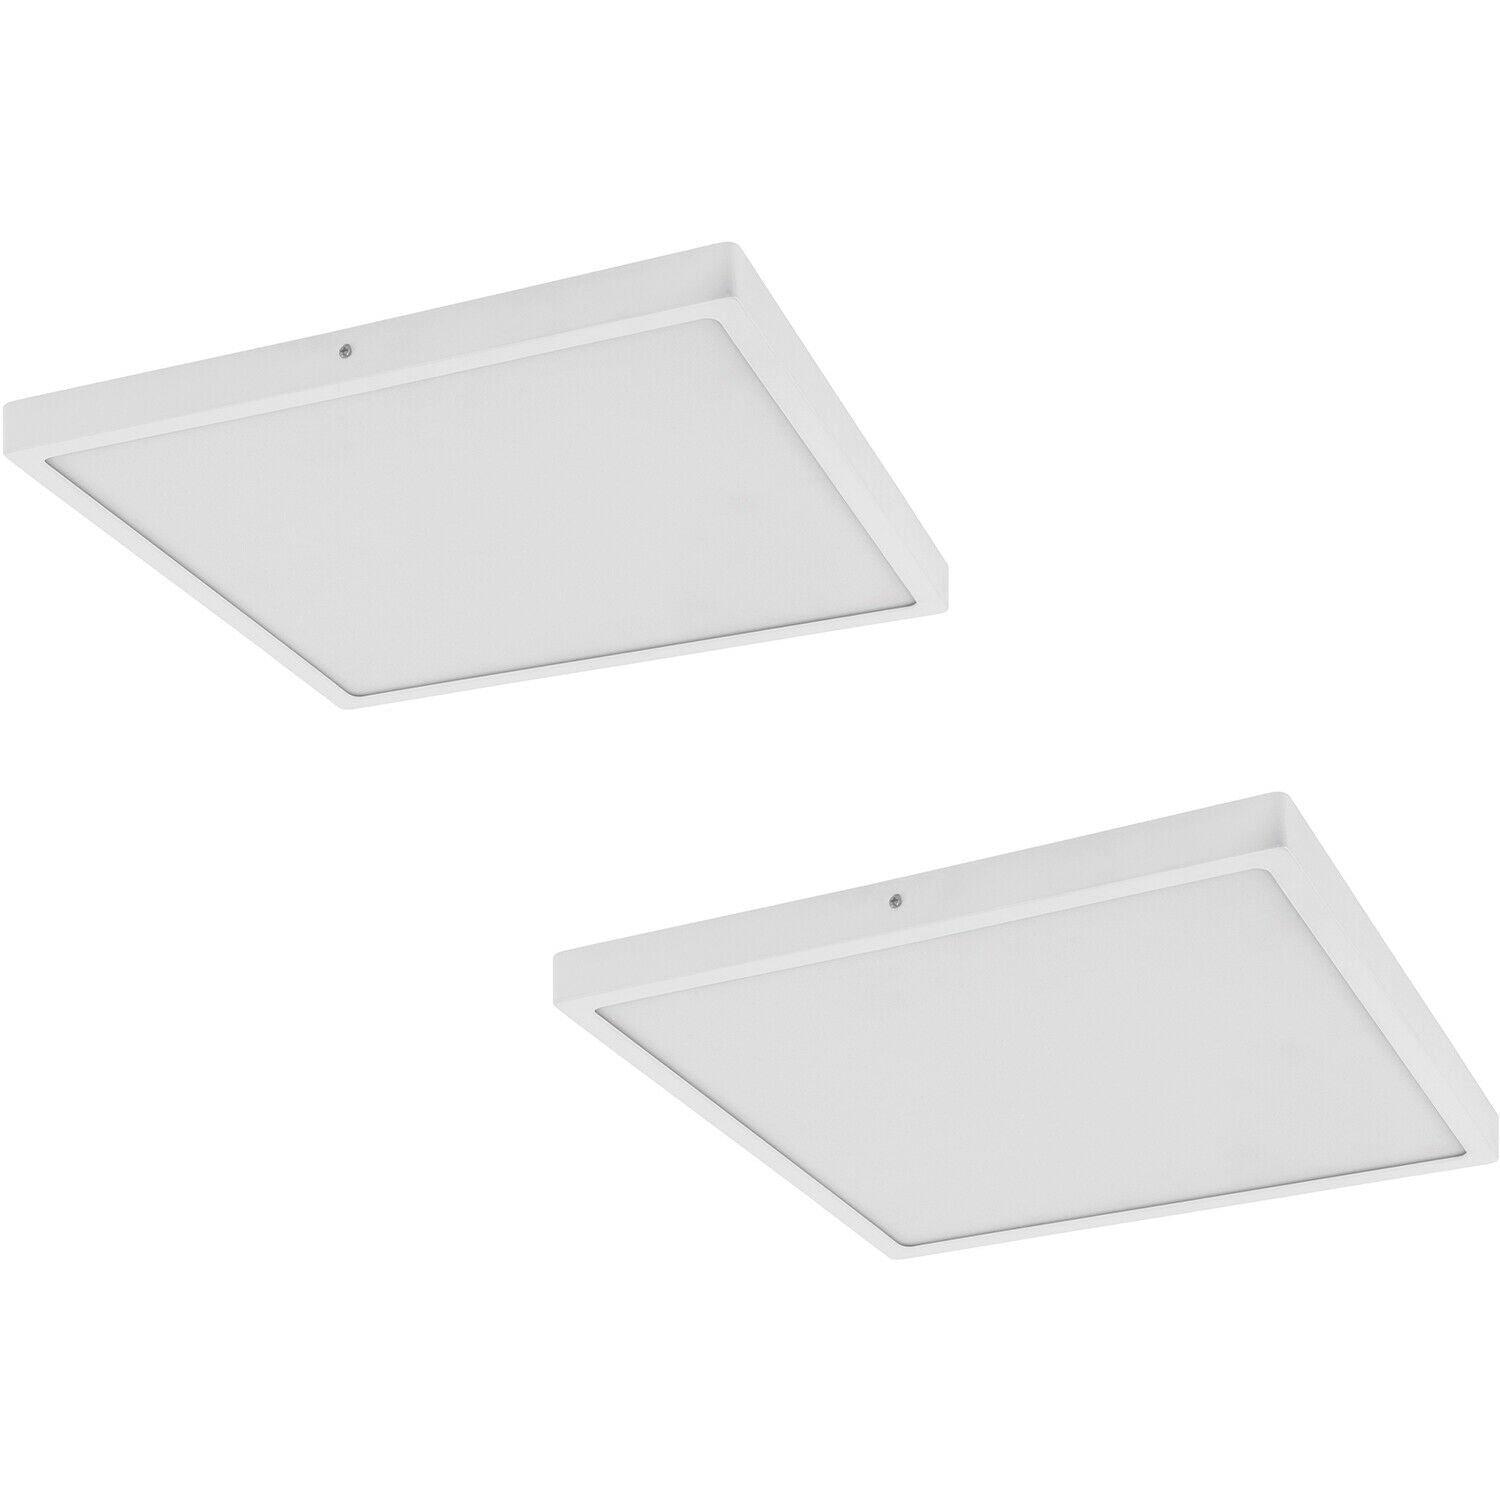 2 PACK Wall / Ceiling Light White 400mm Square Surface Mounted 25W LED 3000K